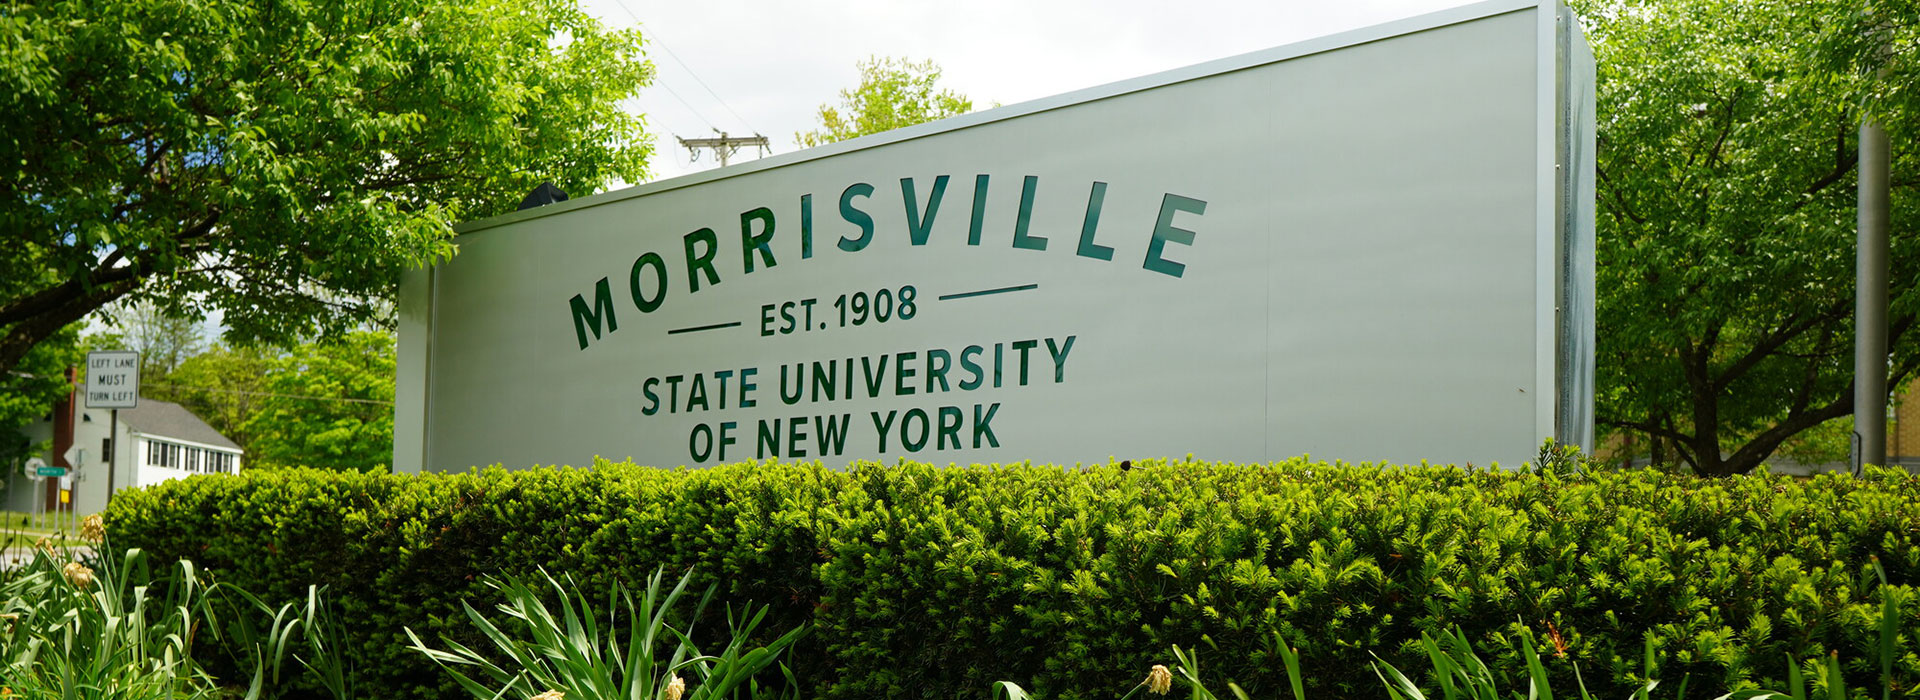 SUNY Morrisville Route 20 Sign